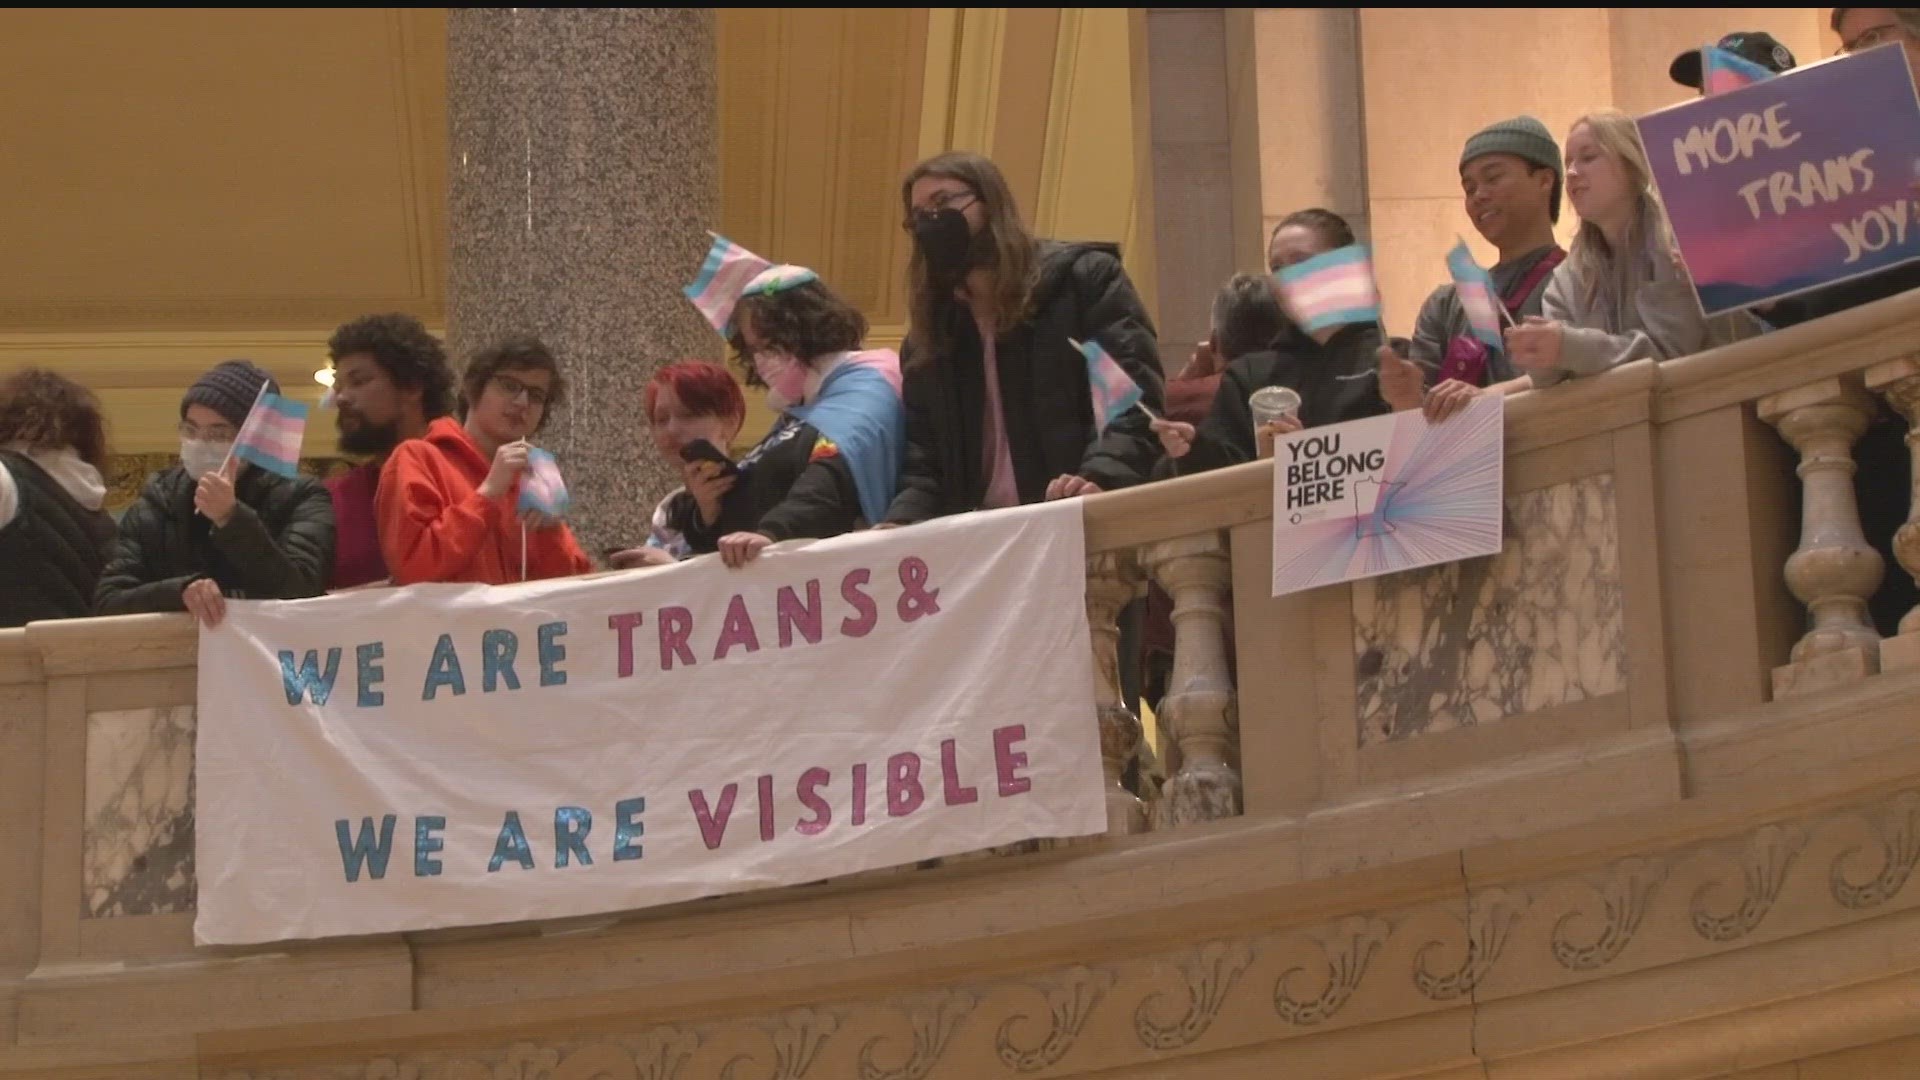 The Minn. Legislature's Queer Caucus garnered thunderous applause at Trans Day of Visibility rally. The event focused on the fight against transgender discrimination